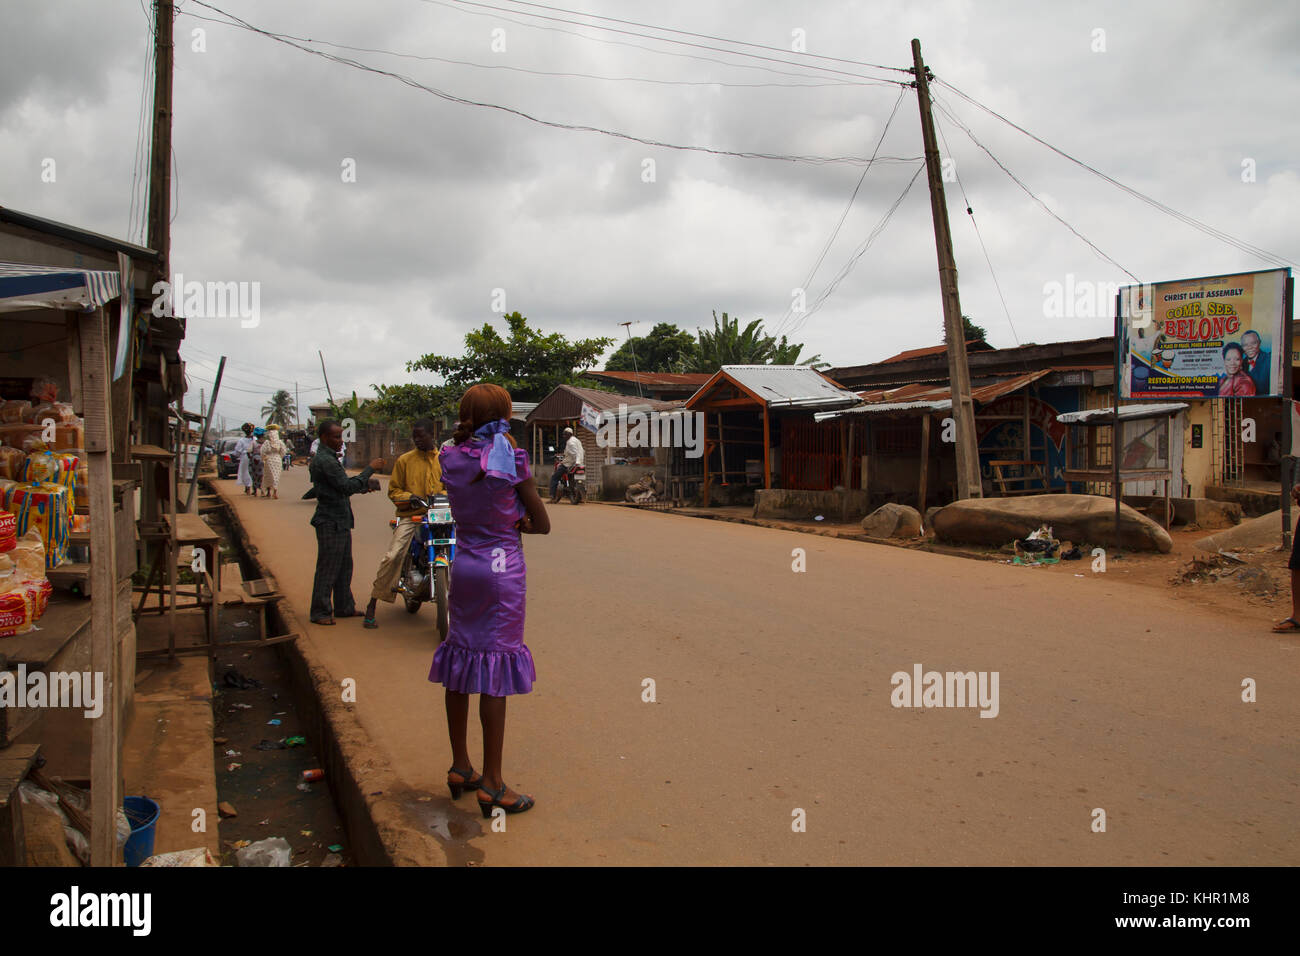 Nigerian men and woman in the street in the city of Akure in Ondo state, Nigeria Stock Photo